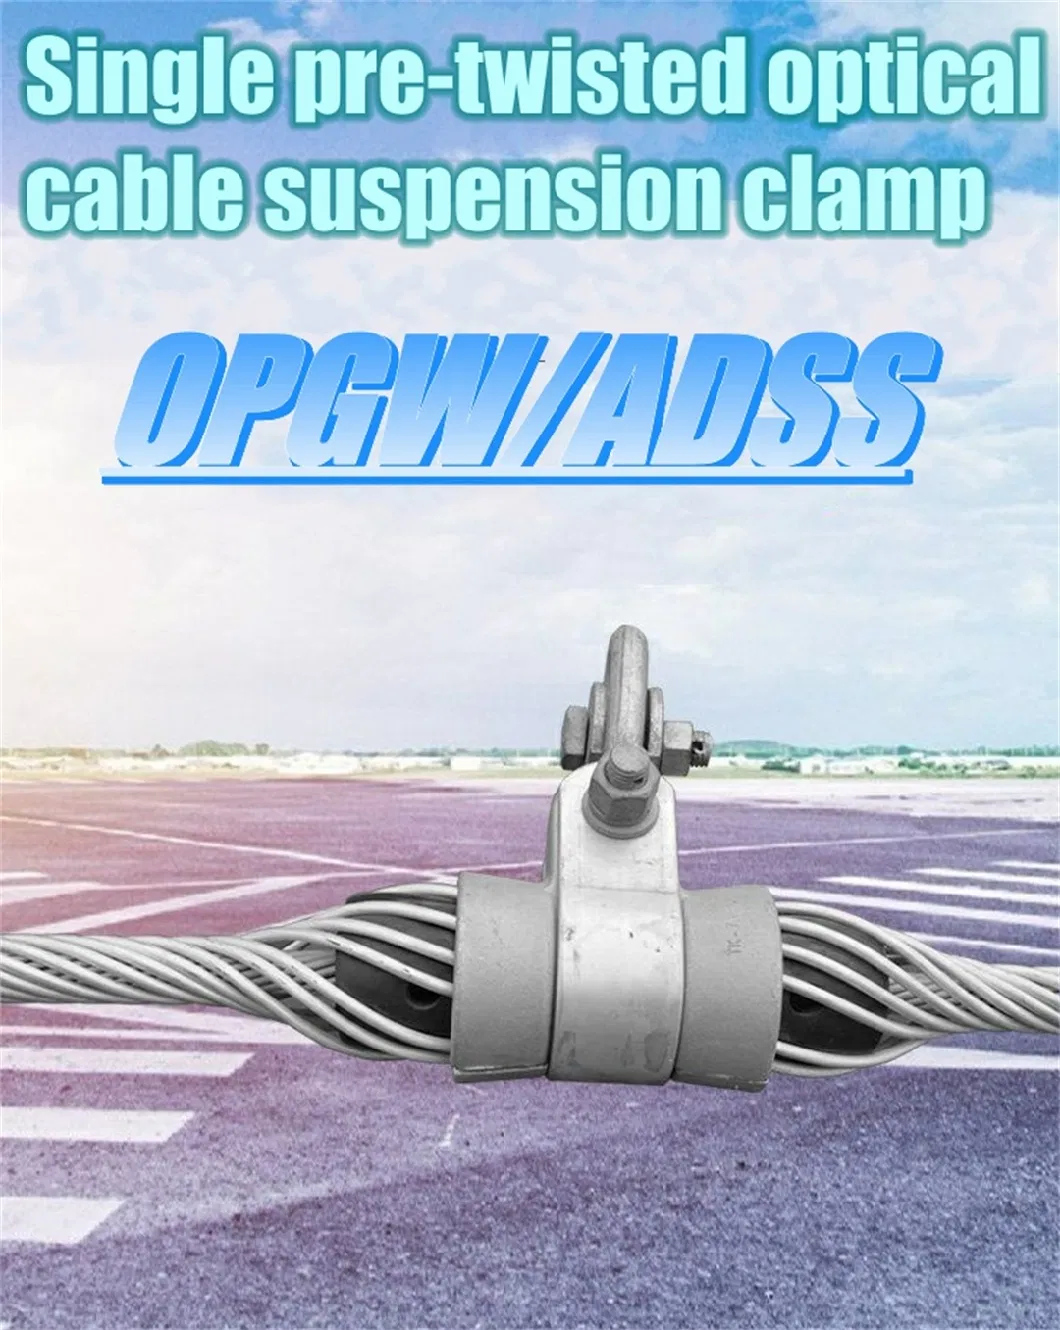 Oxy Opgw/ADSS Overhead Fiber Optic Cable Suspension Clamps Power Fitting for Pole/Tower